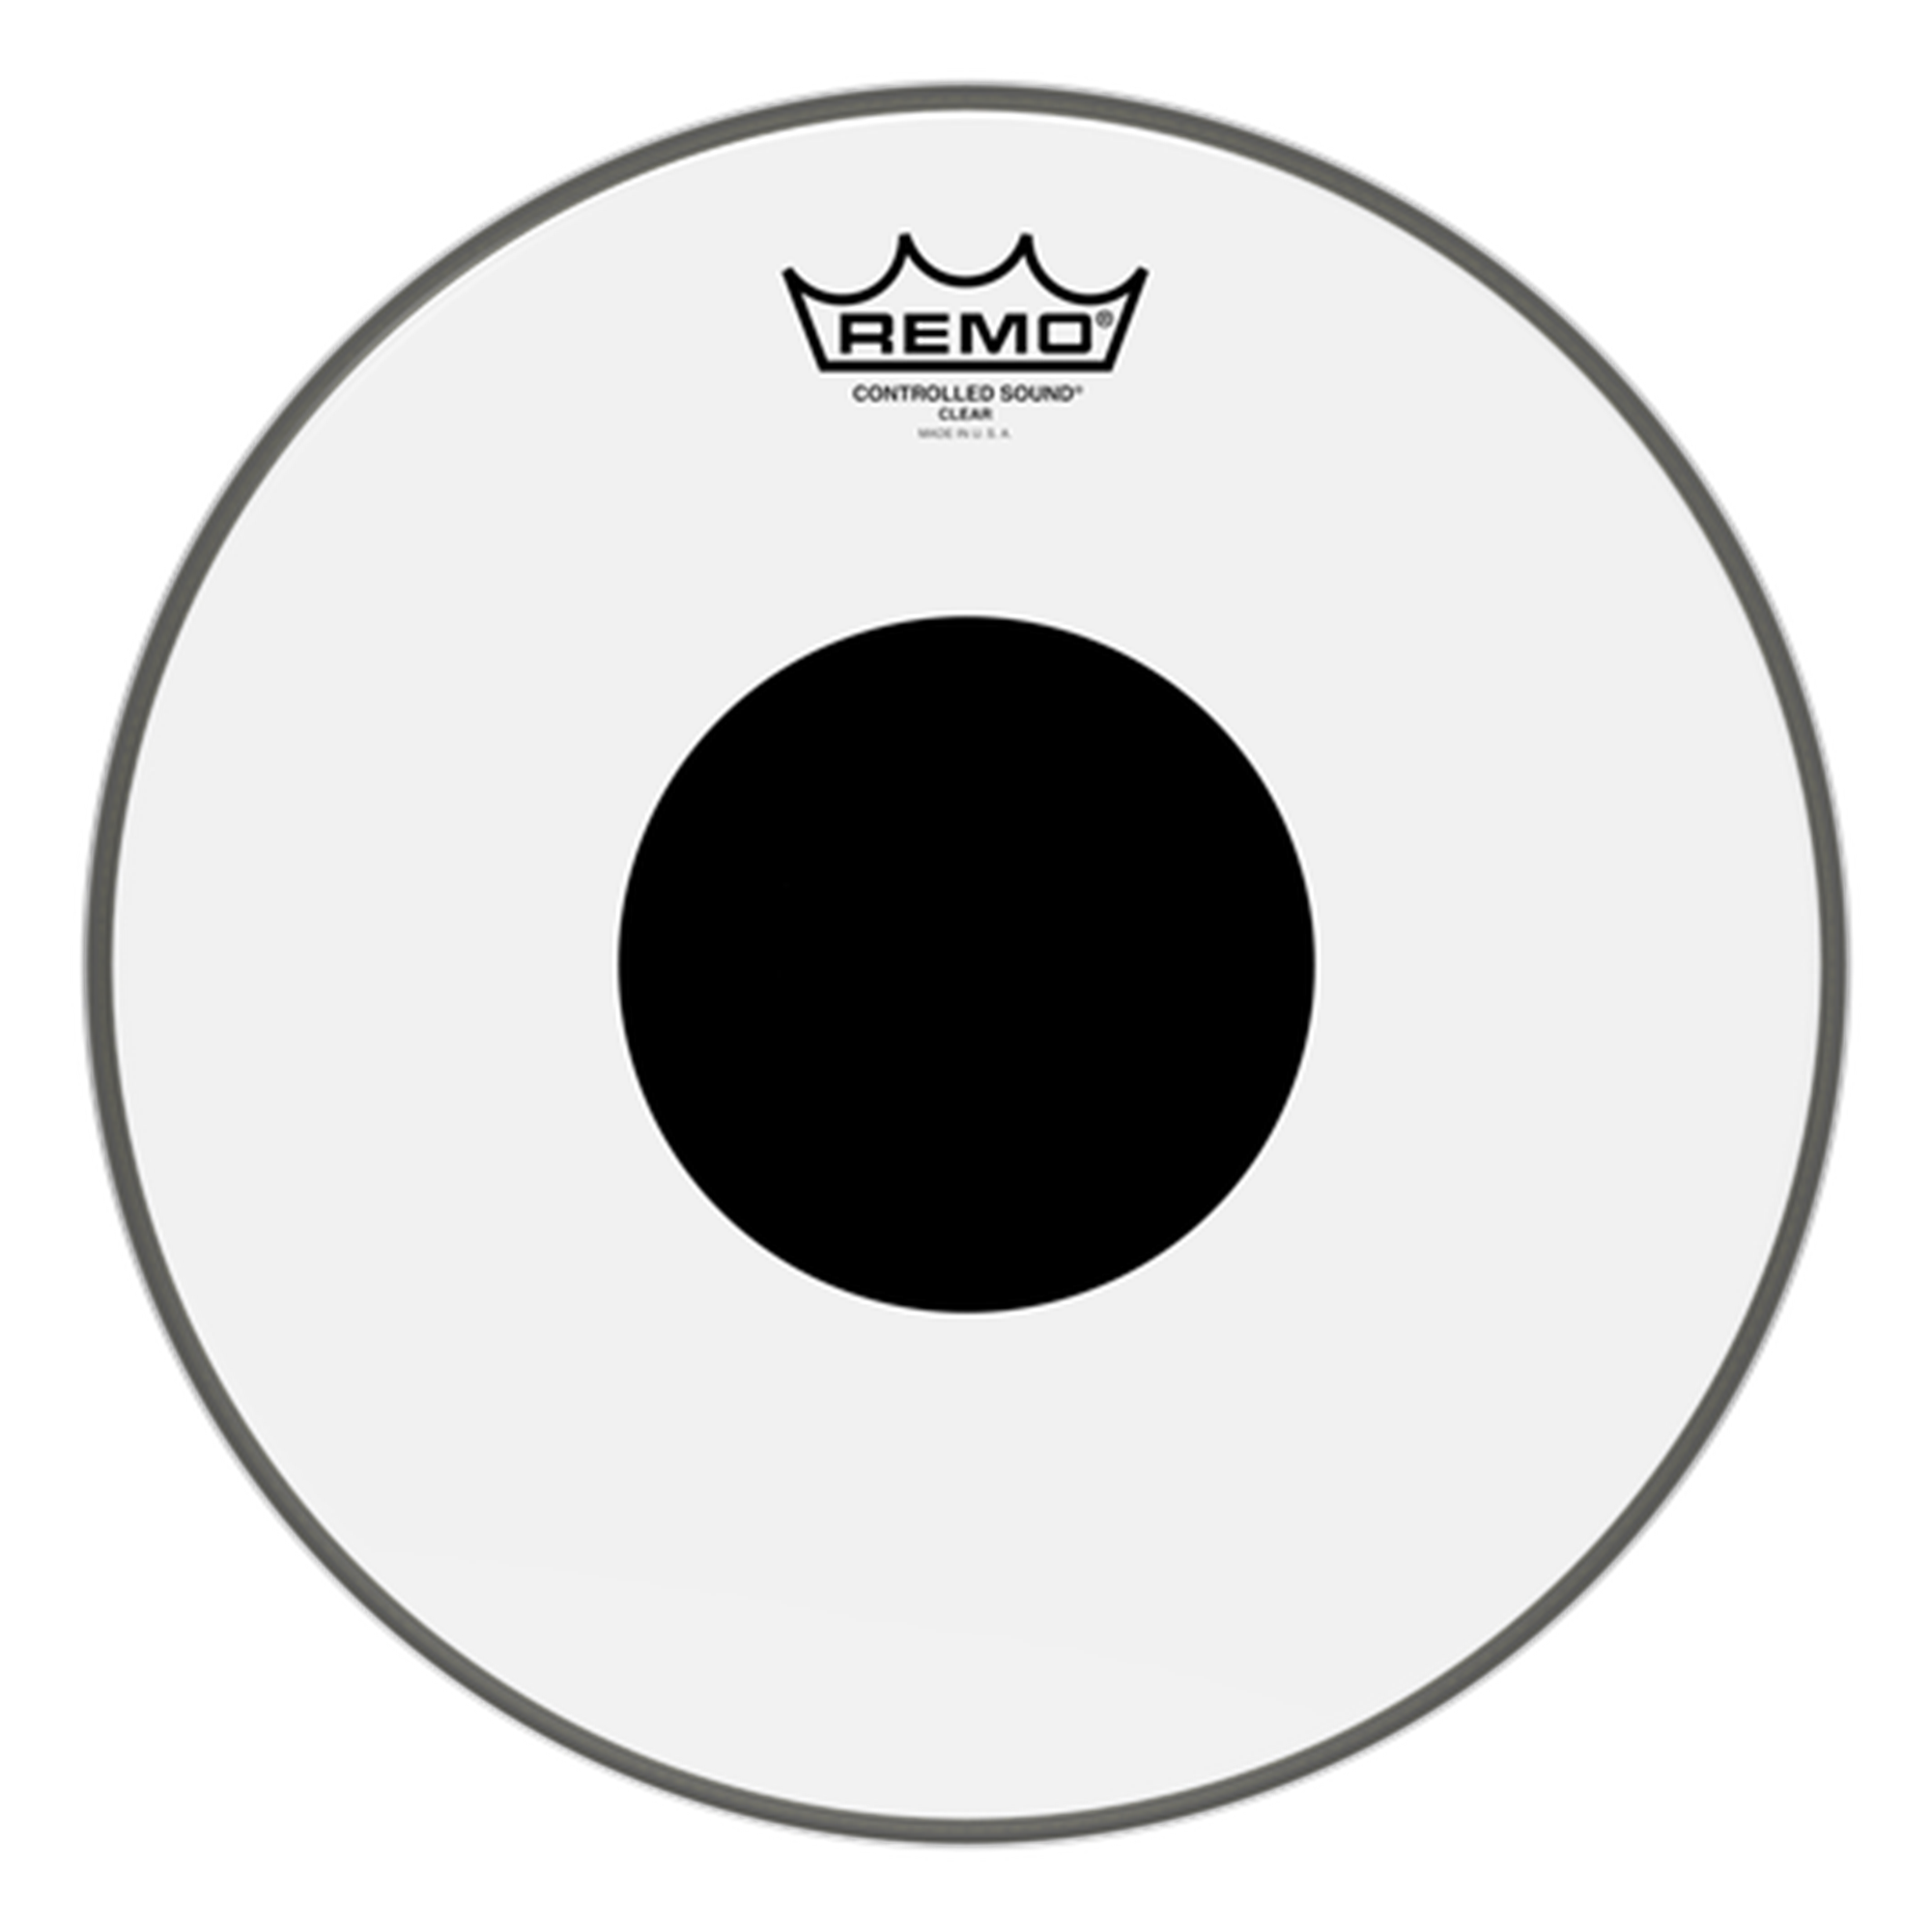 REMO CS-0316-10 16" Clear Controlled Sound Drum Head  (Black Dot On Top)